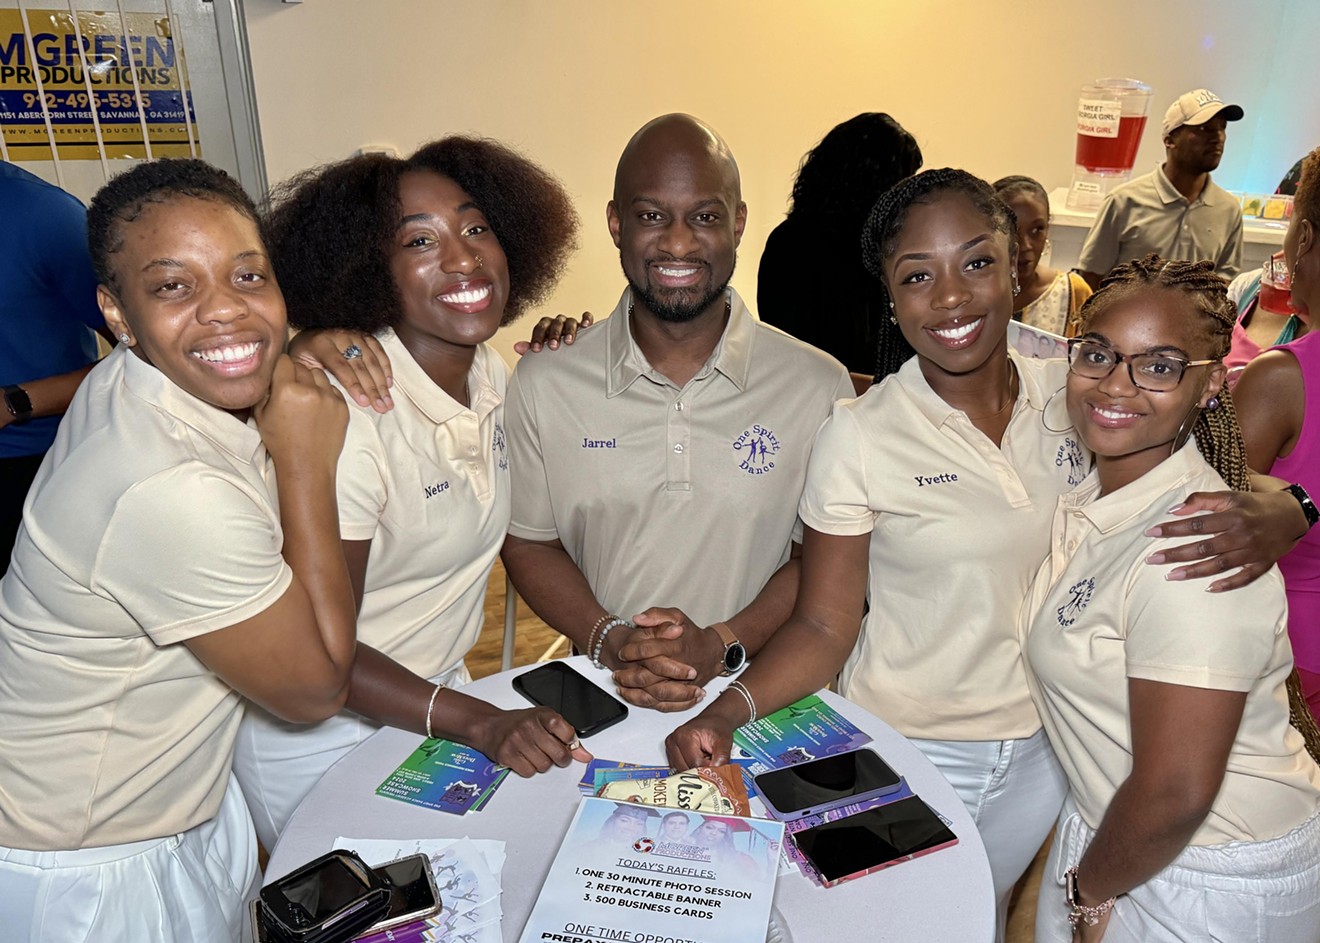 MGreen Productions Hosts Greater Savannah Black Chamber Of Commerce June Meeting